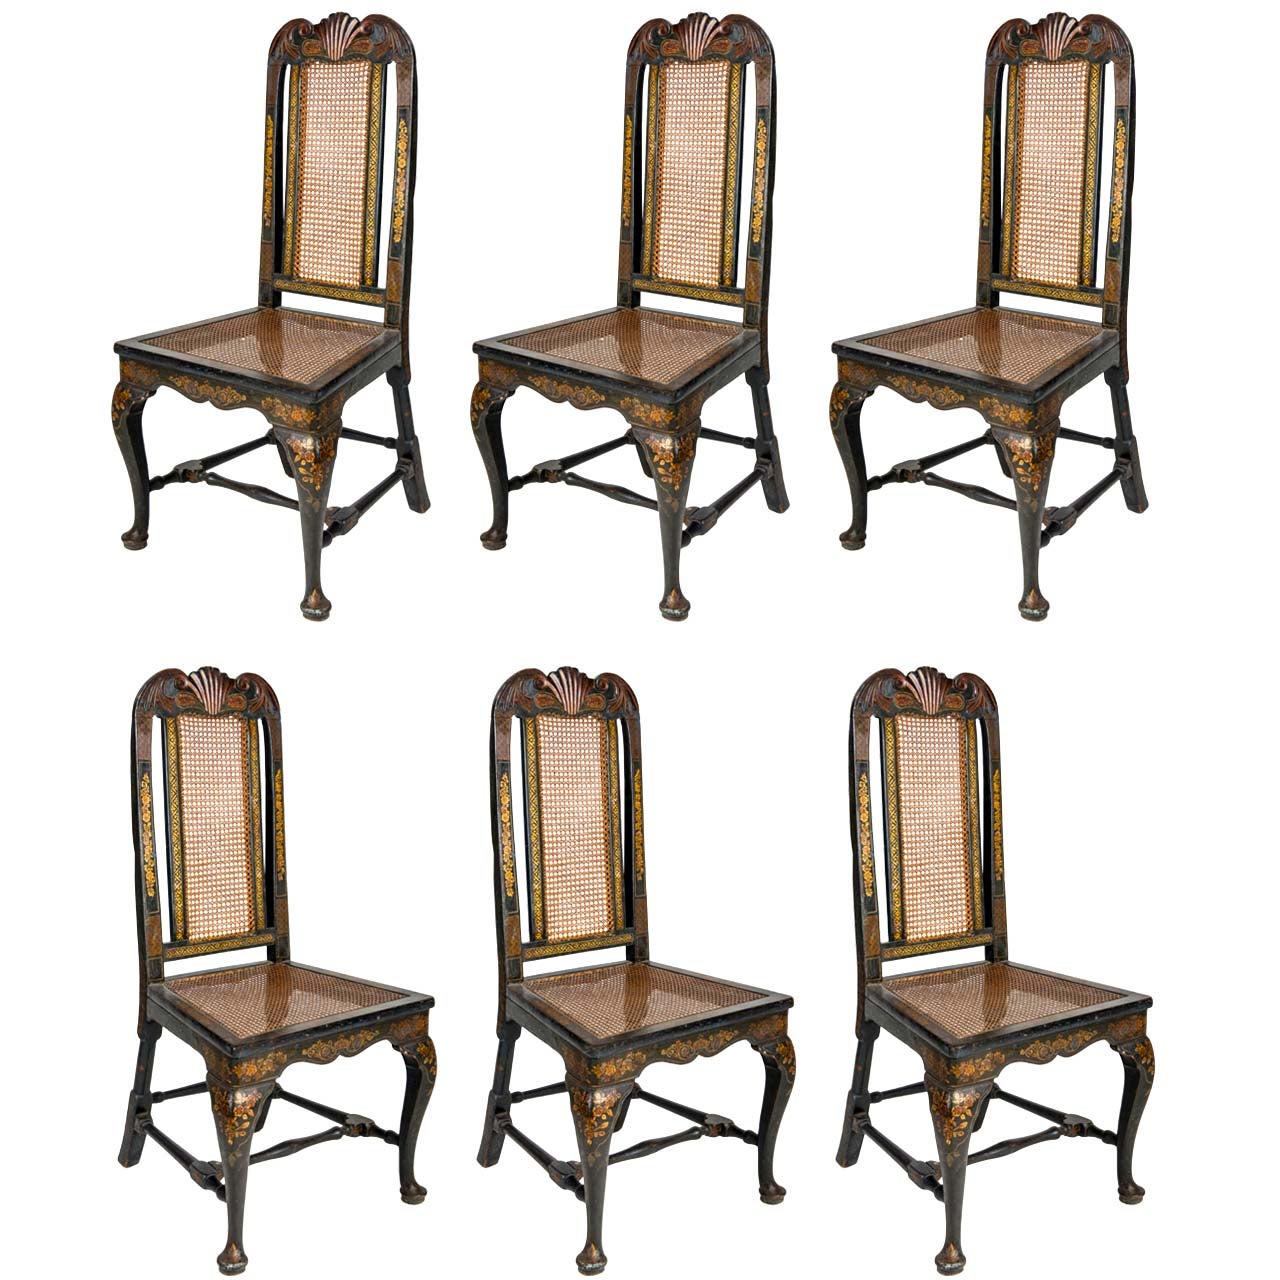 Six 18th Century Elegant Dining Room Chairs, England, 1750 For Sale